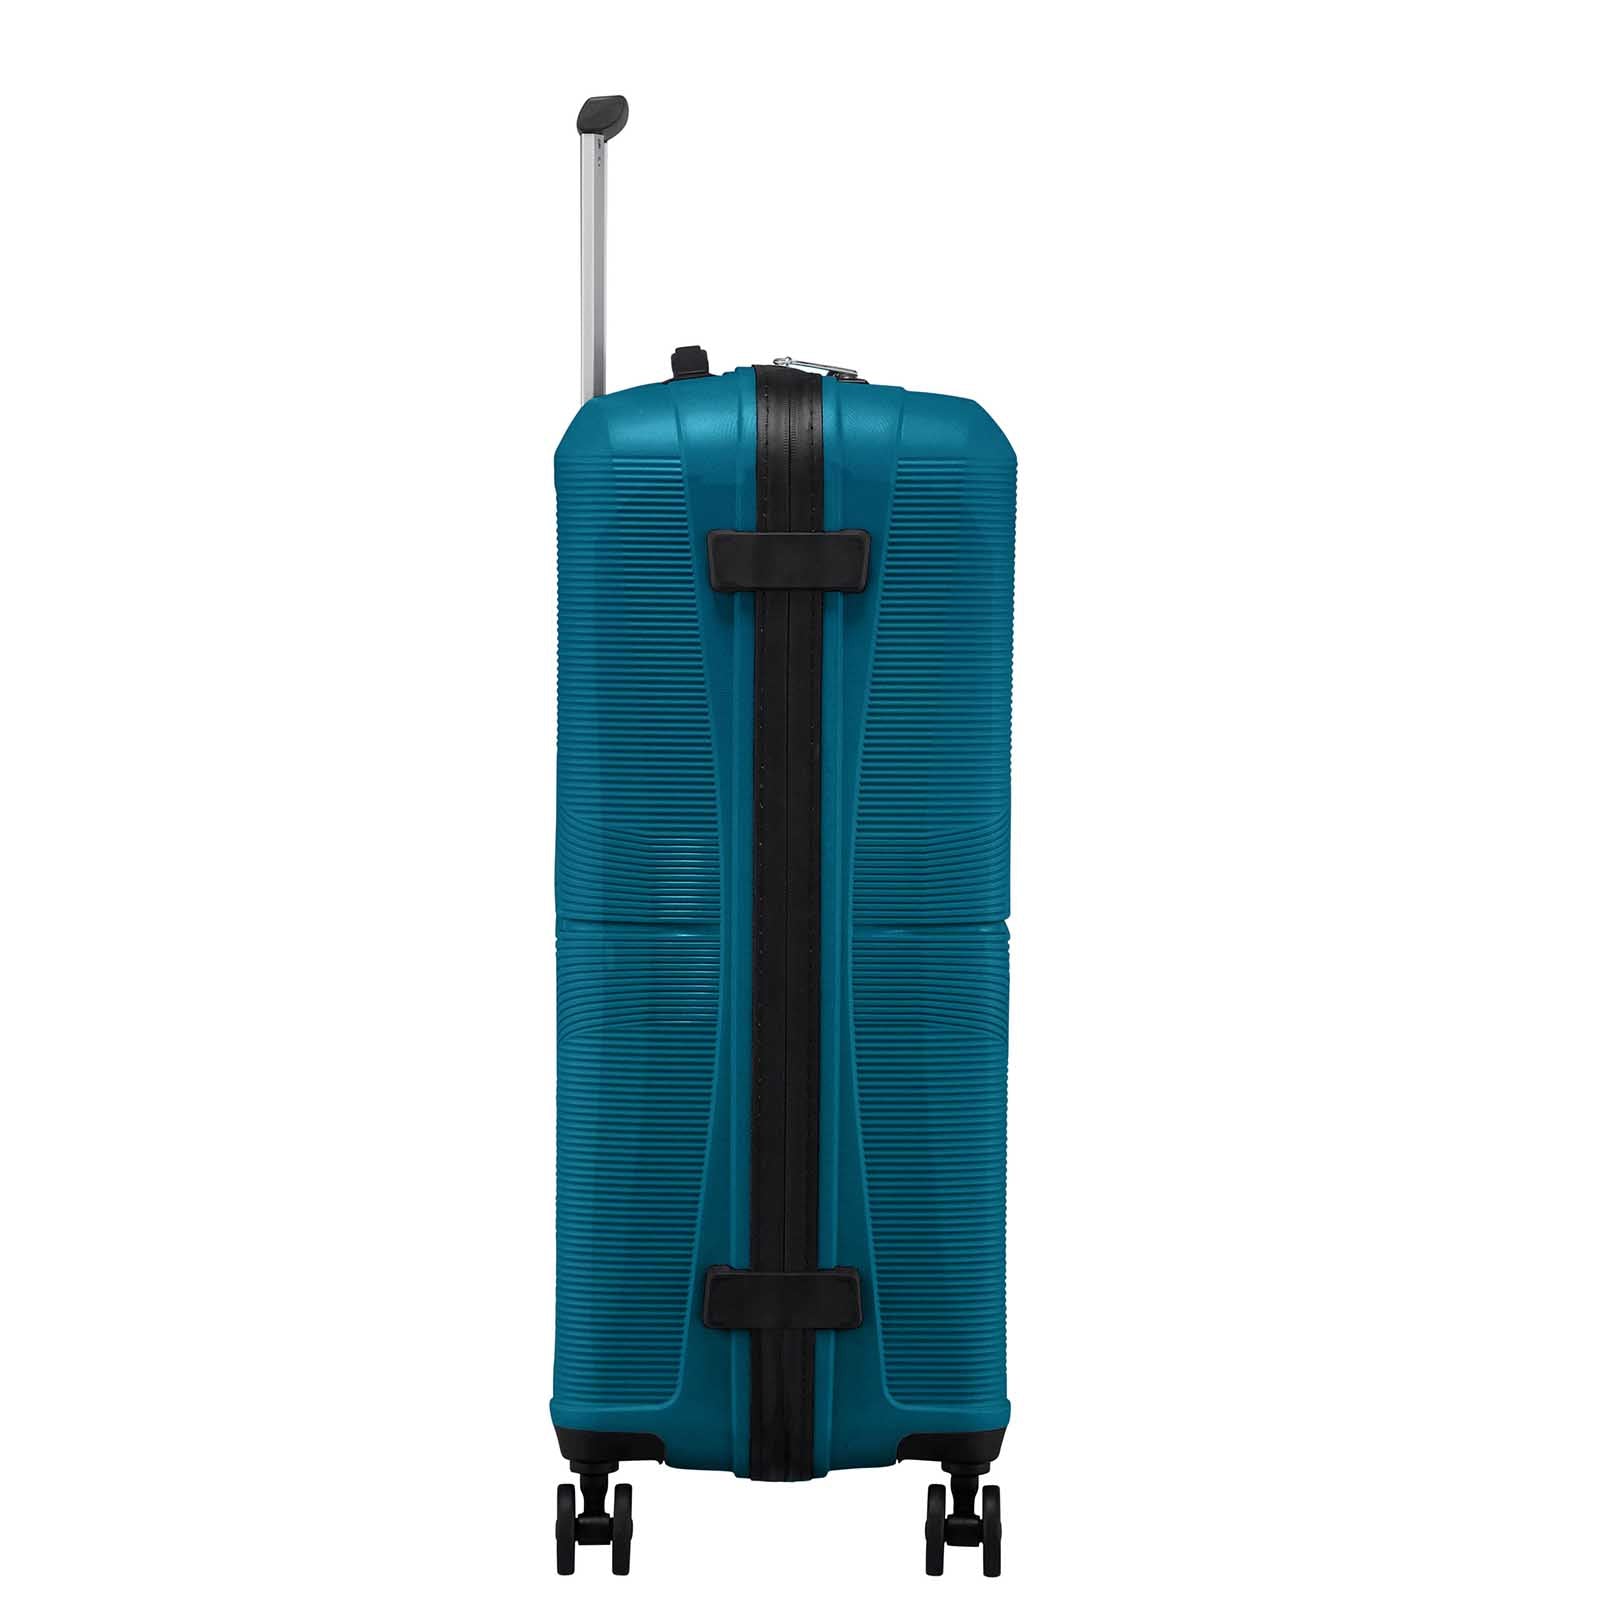 American-Tourister-Airconic-67cm-Suitcase-Deep-Ocean-Side-LH